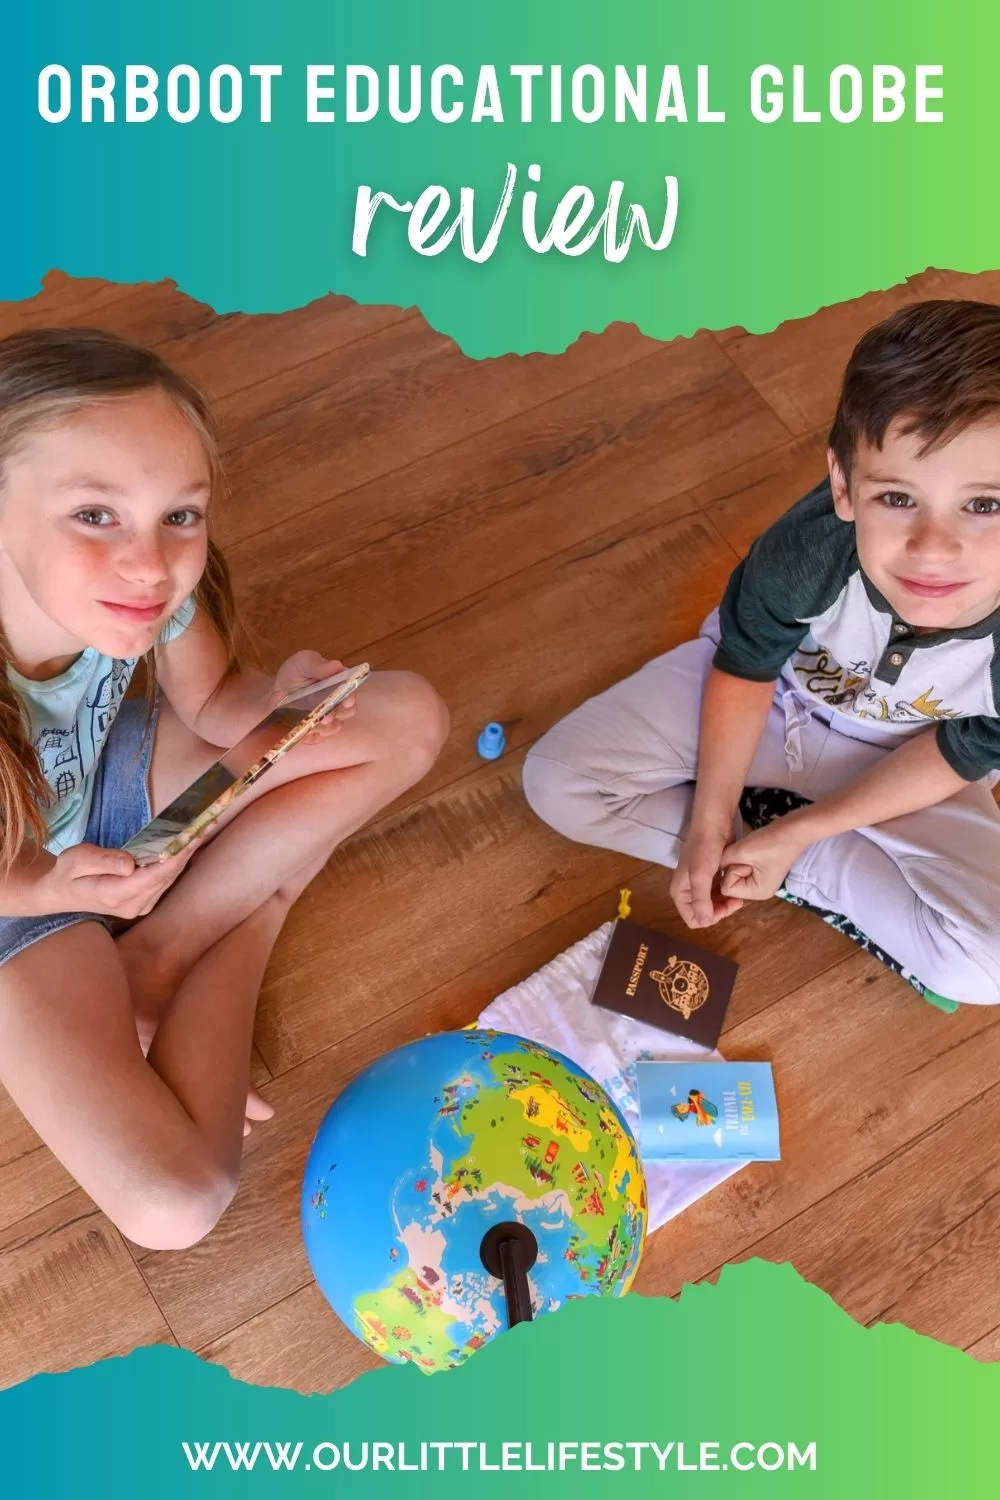 image shows a boy and girl playing with the Orboot Educational Globe and the caption reads "Orboot Educational Globe Review"